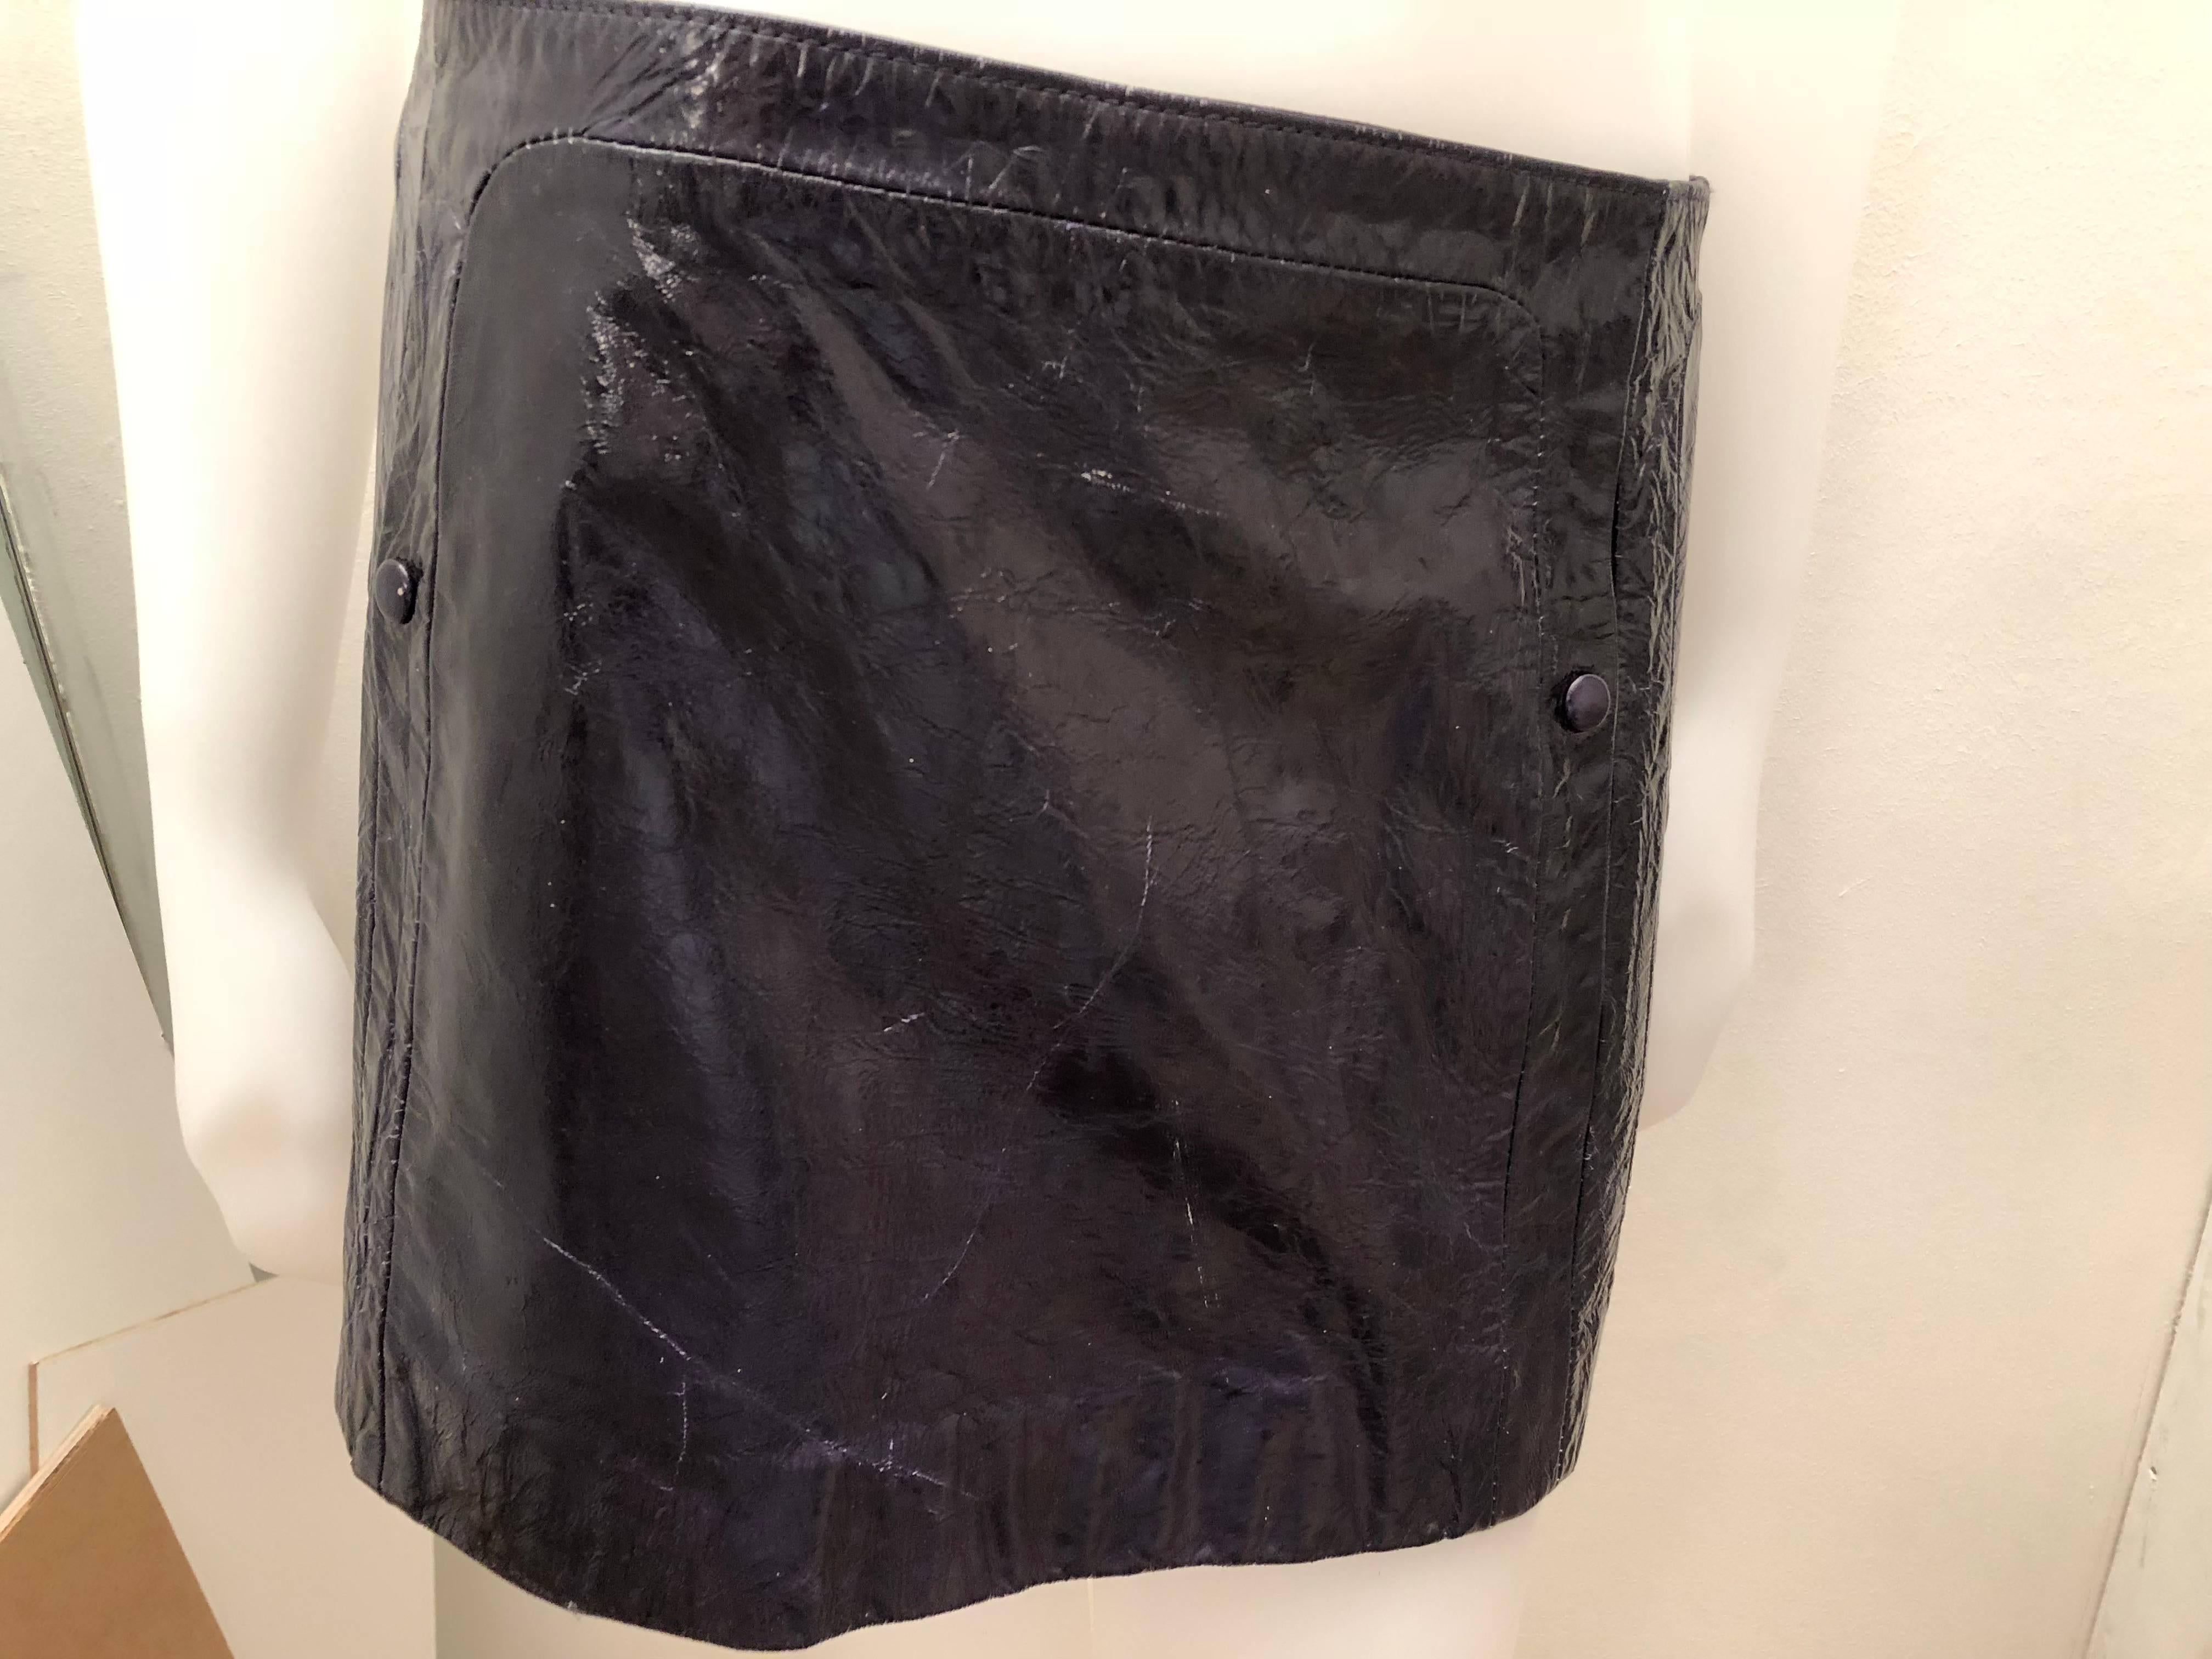 You are looking at a new Just Cavalli Patent Leather Blue skirt in an Italian size 42.
I am not exactly sure of the age but it has never worn and all the labels are still on the skirt.
Its a fun wonderful addition to any wardrobe. Please pay close